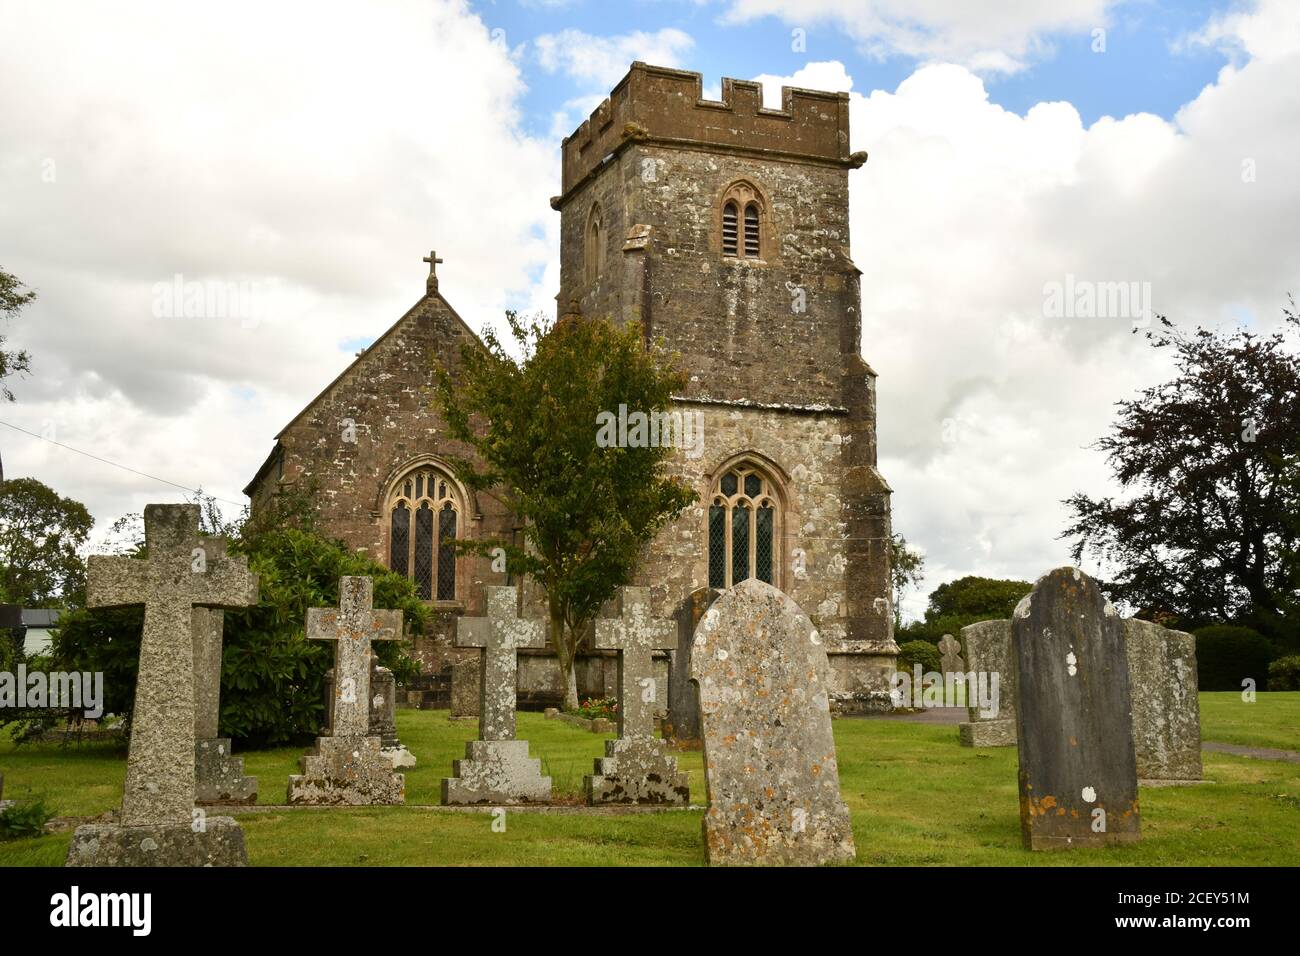 The Anglican Church of St Michael and All Angels in Penselwood, Somerset, England.  Grade 2 listed was built in the 15th century. Stock Photo